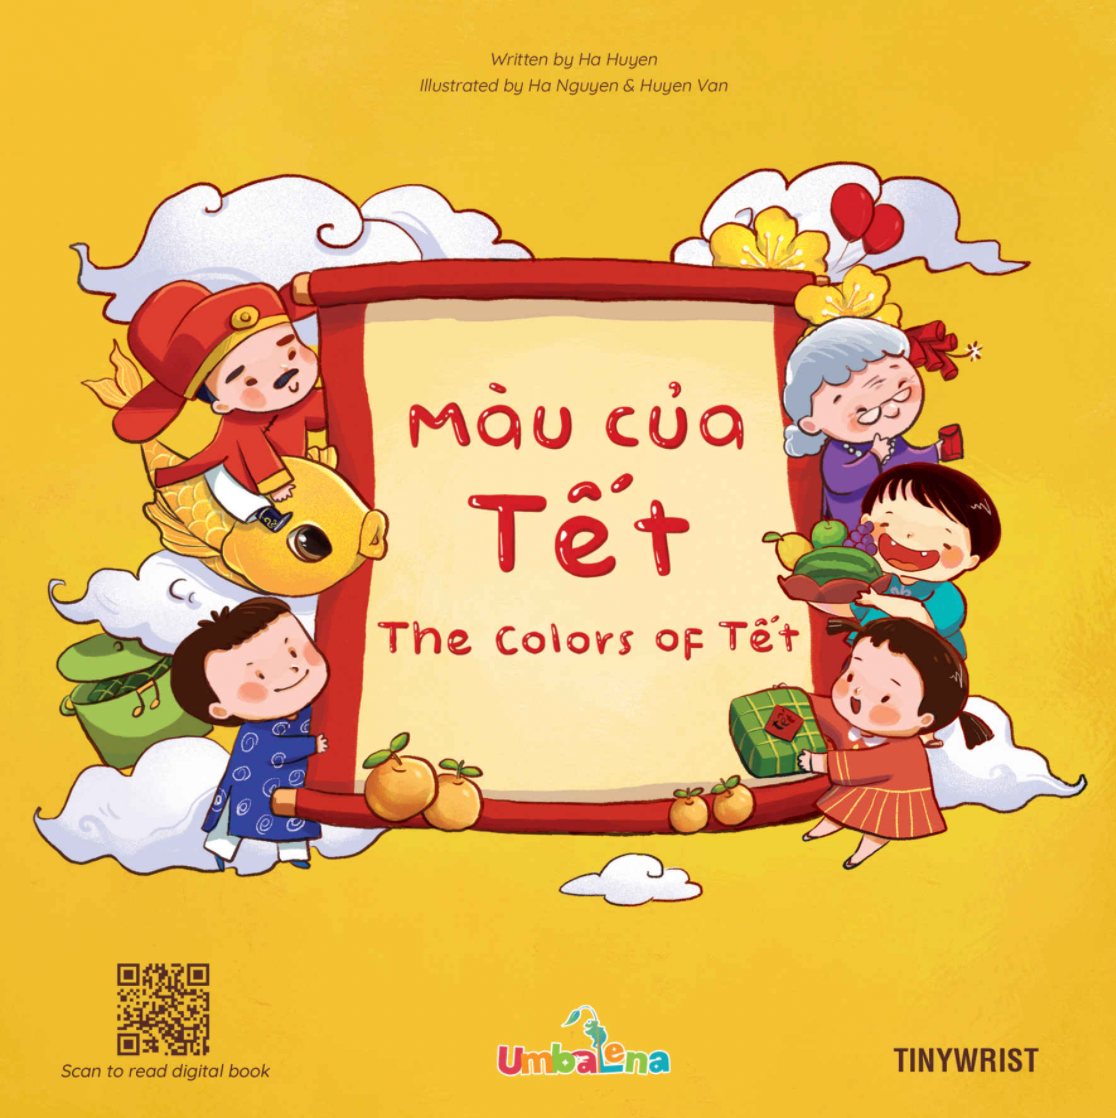 Book cover for "Mau Cua Tet: The Colors of Tet." Illustrated characters frame the book title, displayed on a scroll.